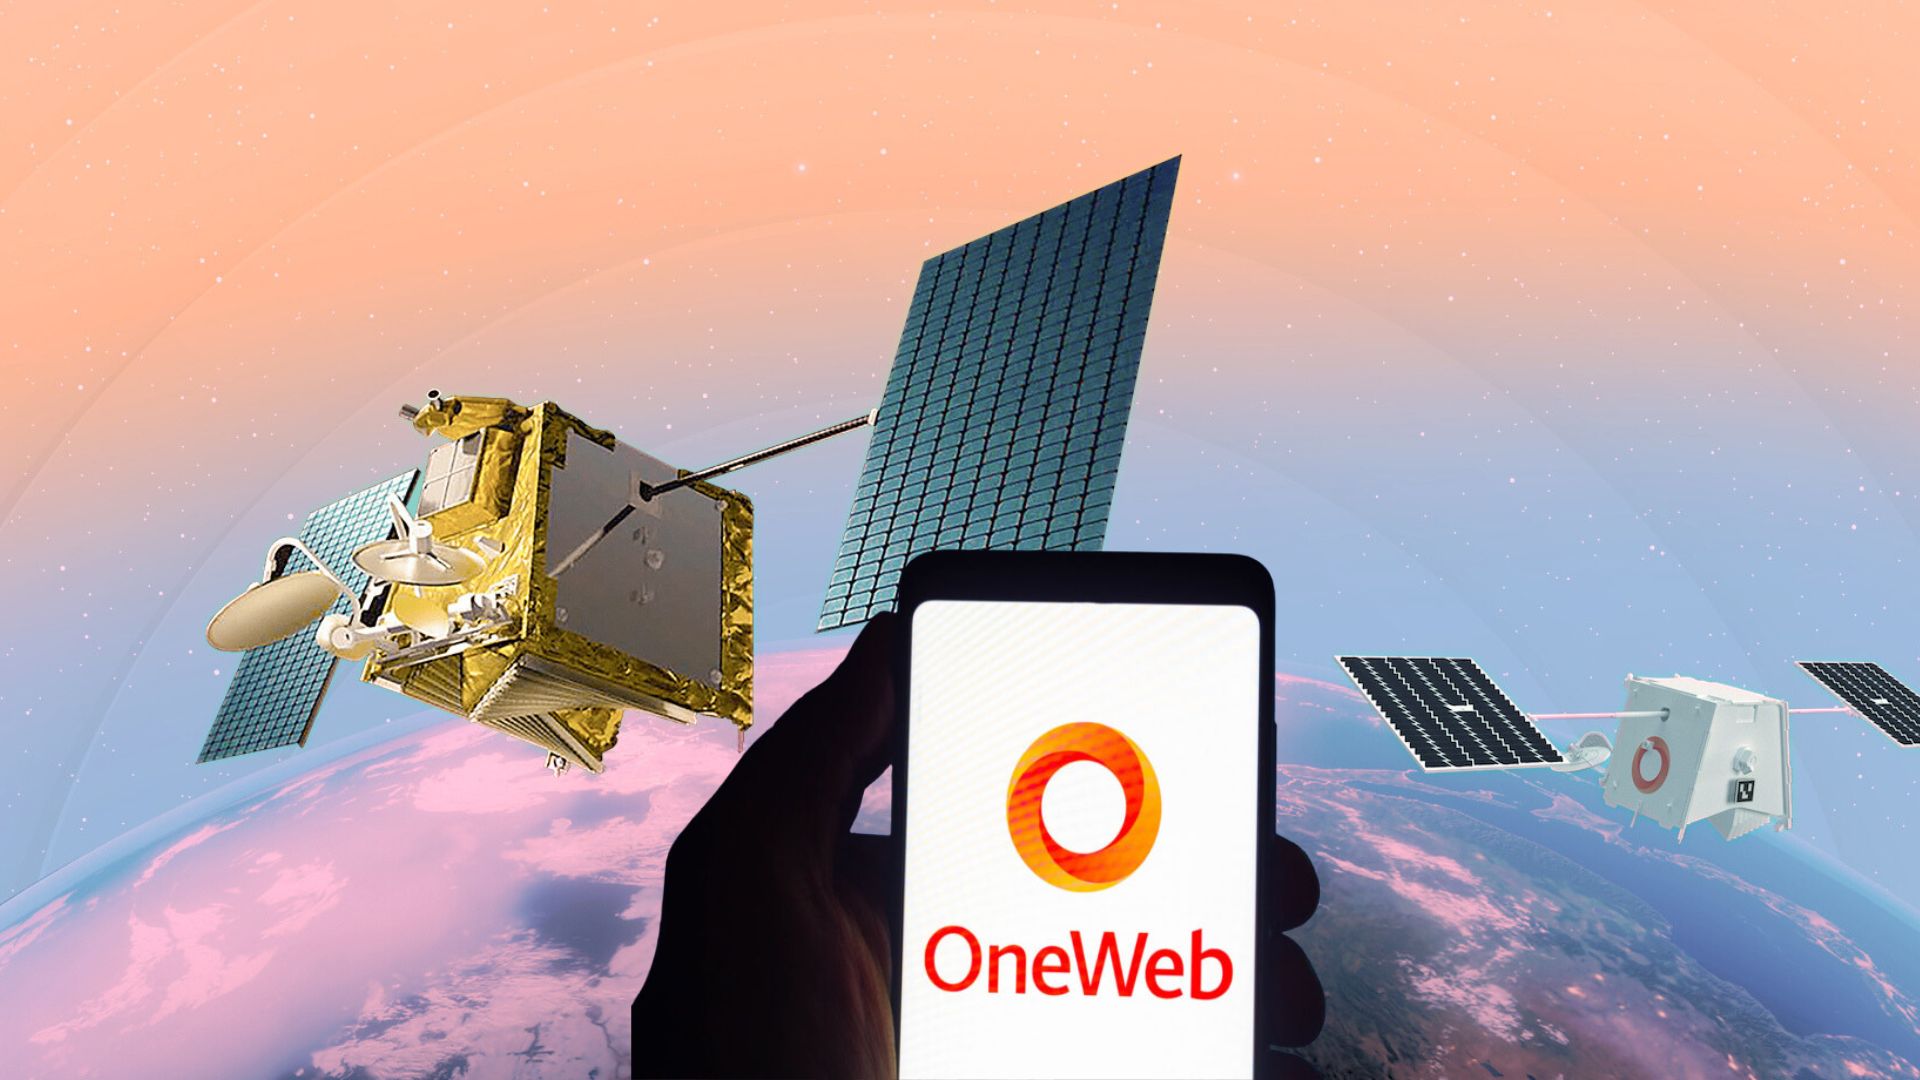 OneWeb in India: one step closer to global coverage